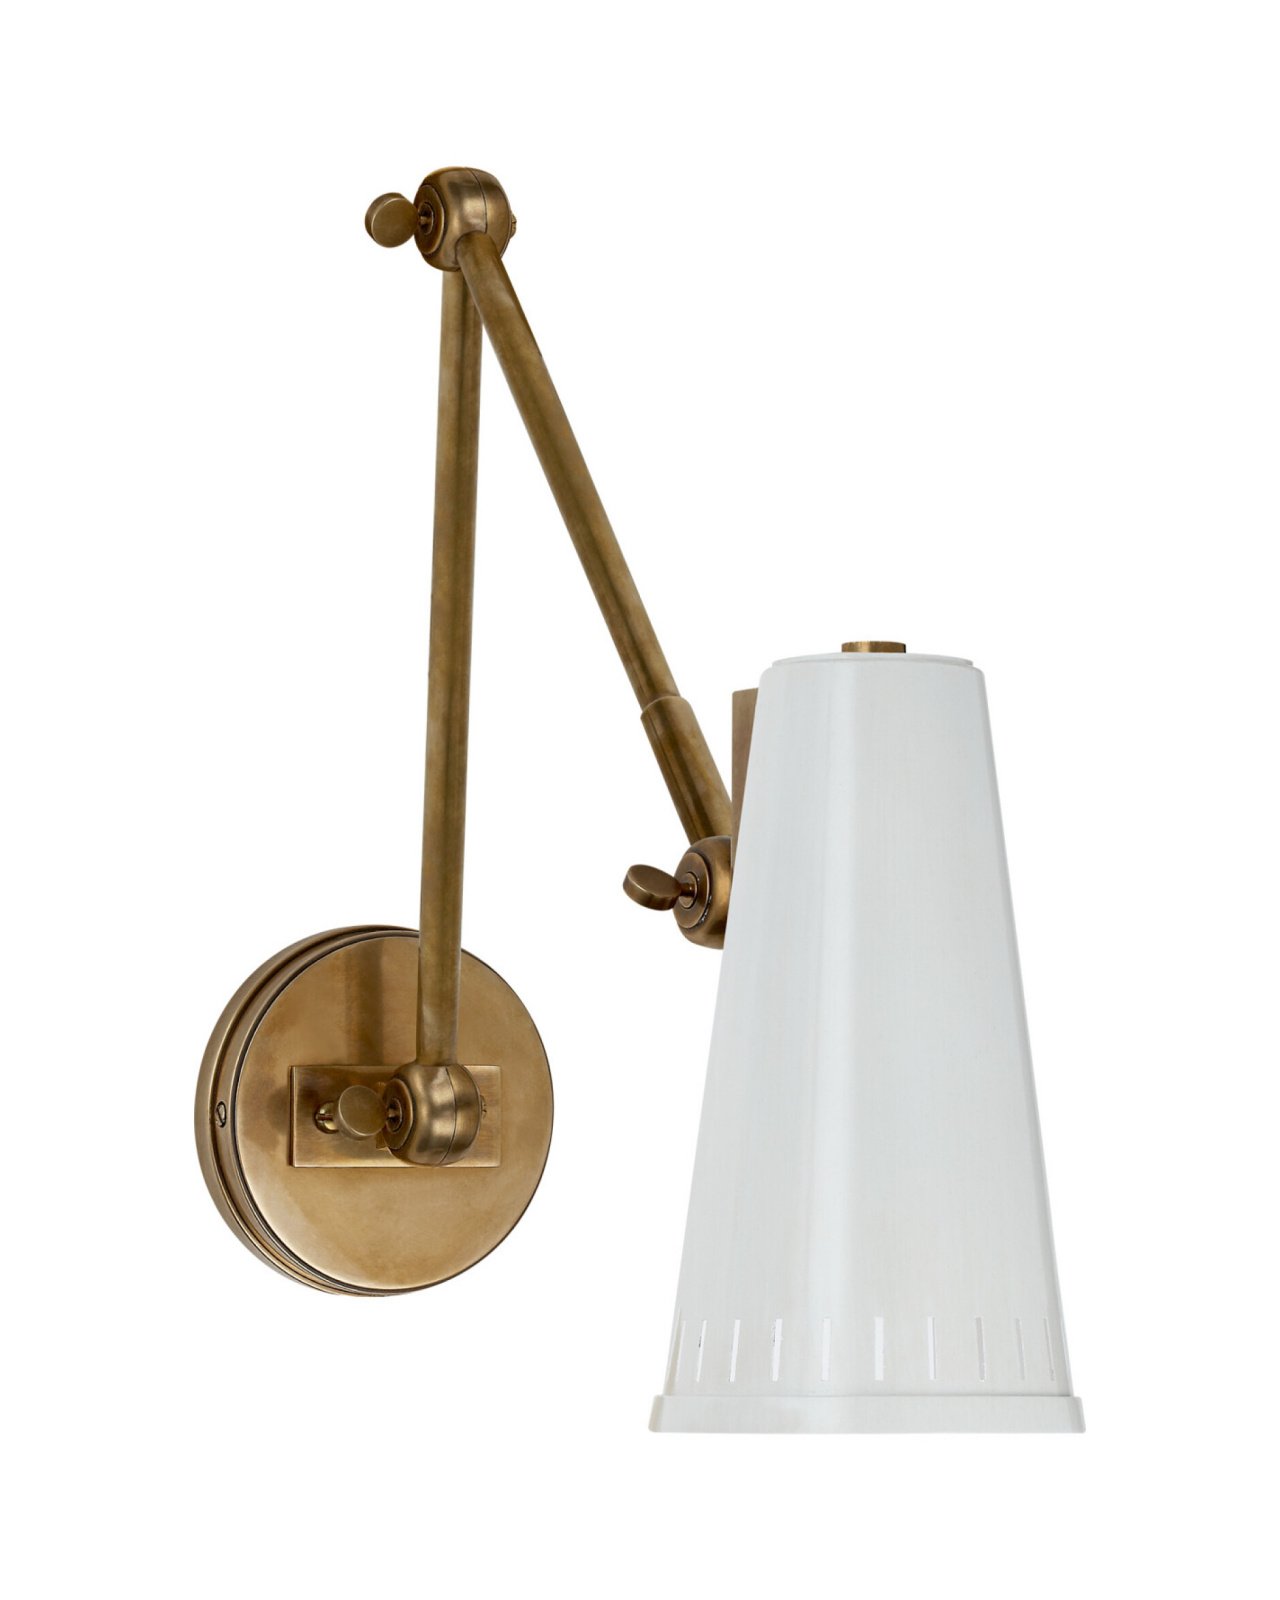 Antonio Adjustable Two Arm Wall Lamp Antique Brass/Antique White Shade